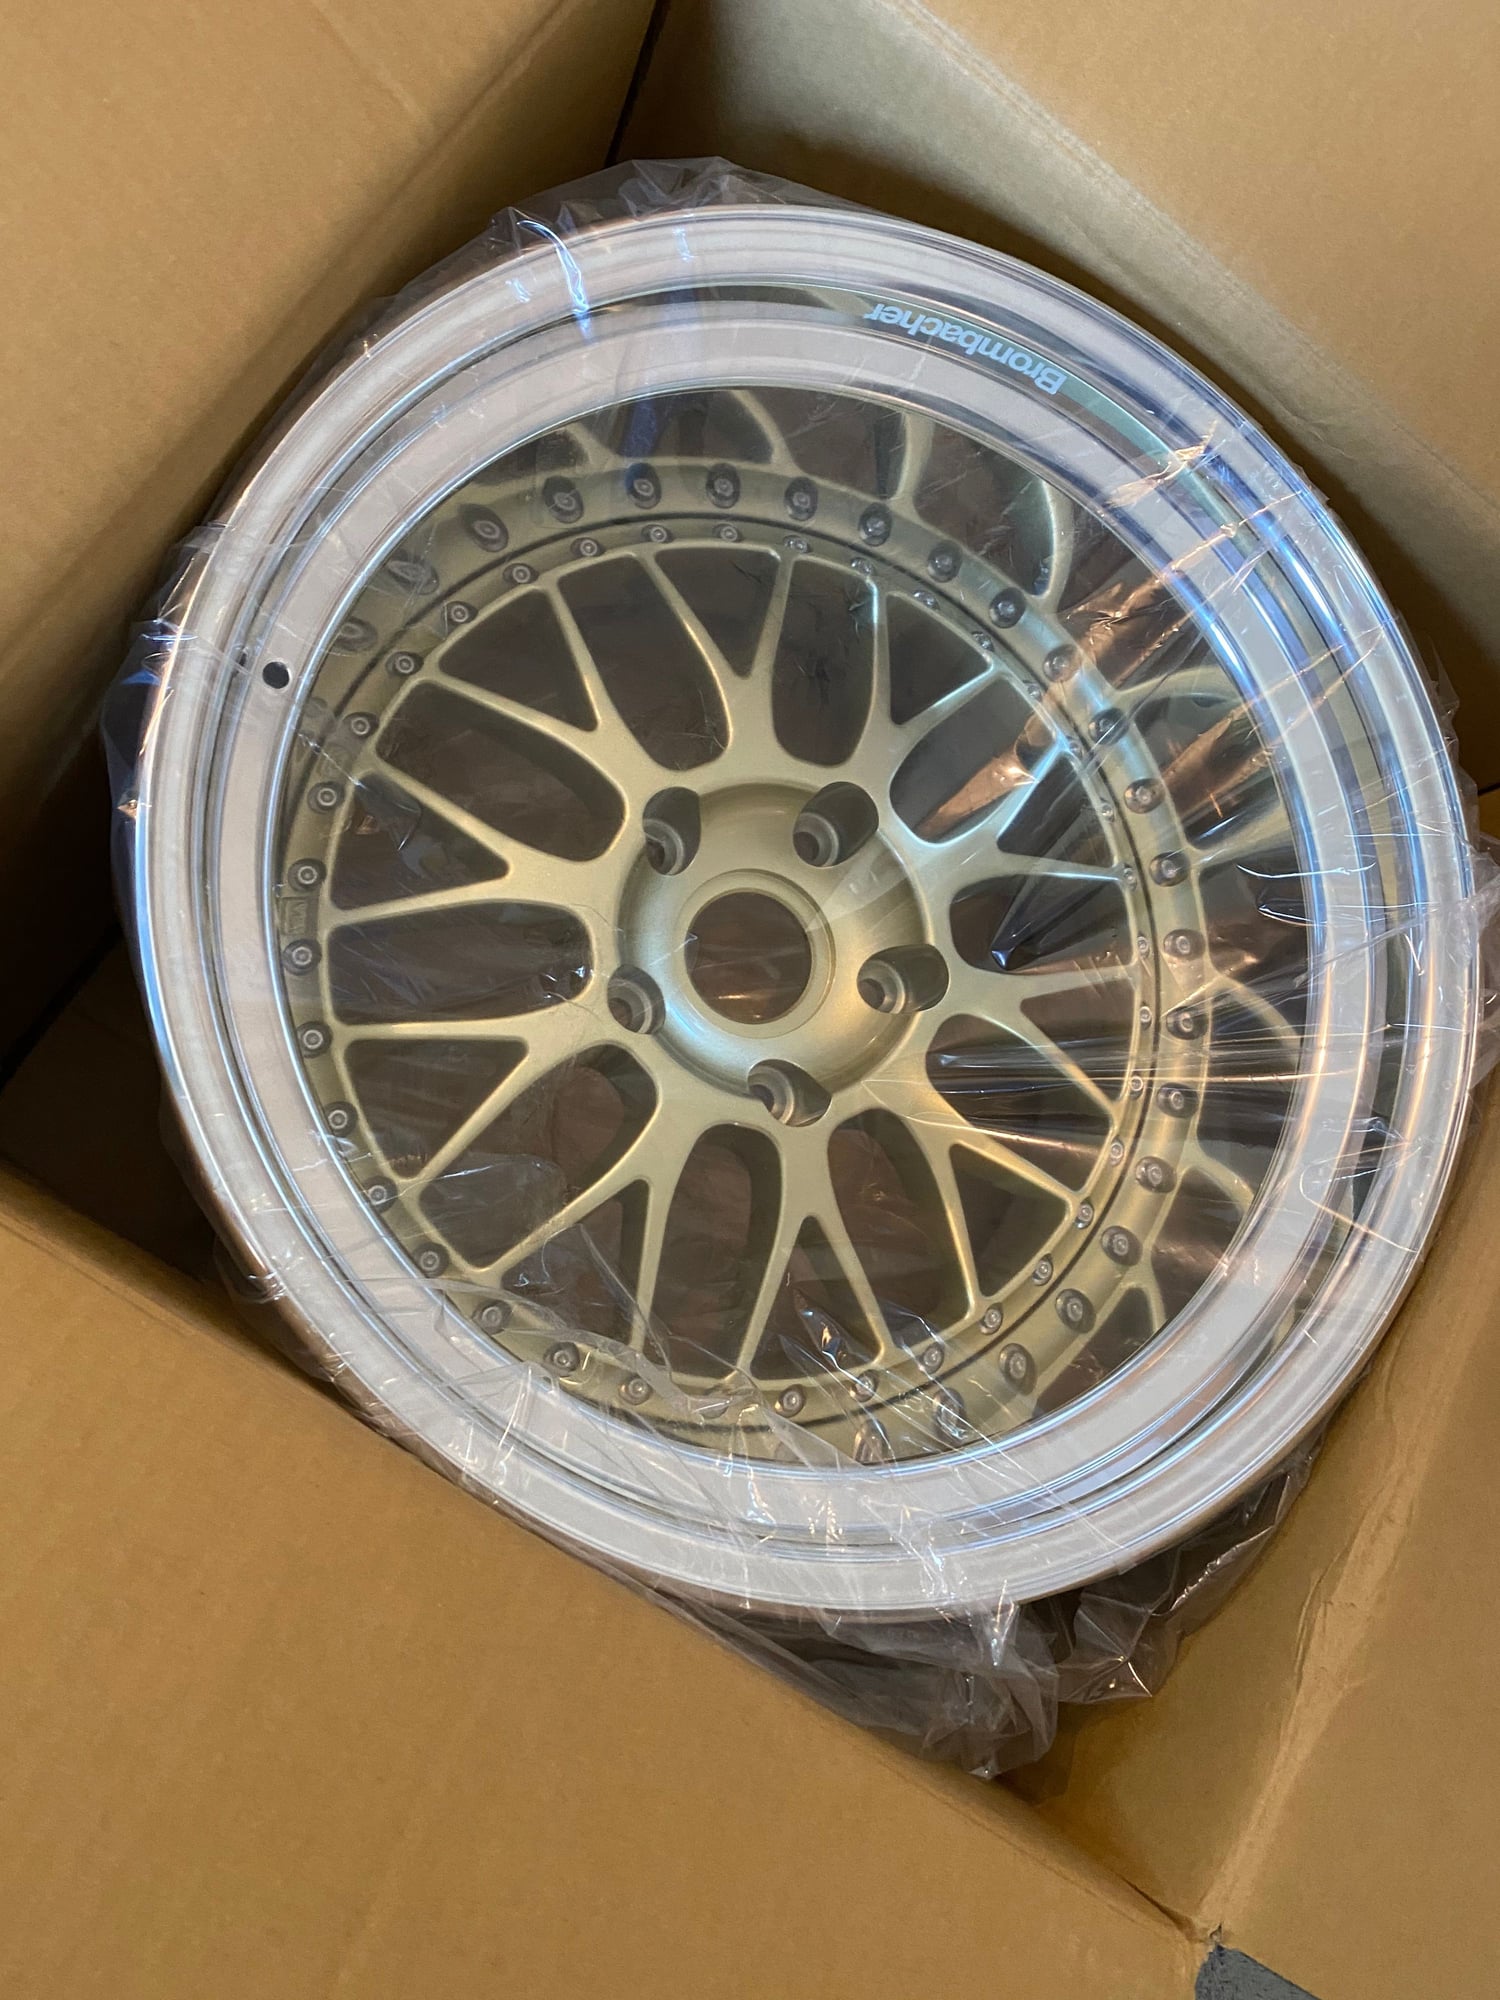 Wheels and Tires/Axles - Work Brombacher wheels - Brand new never mounted - New - All Years Porsche All Models - Los Angeles, CA 90016, United States